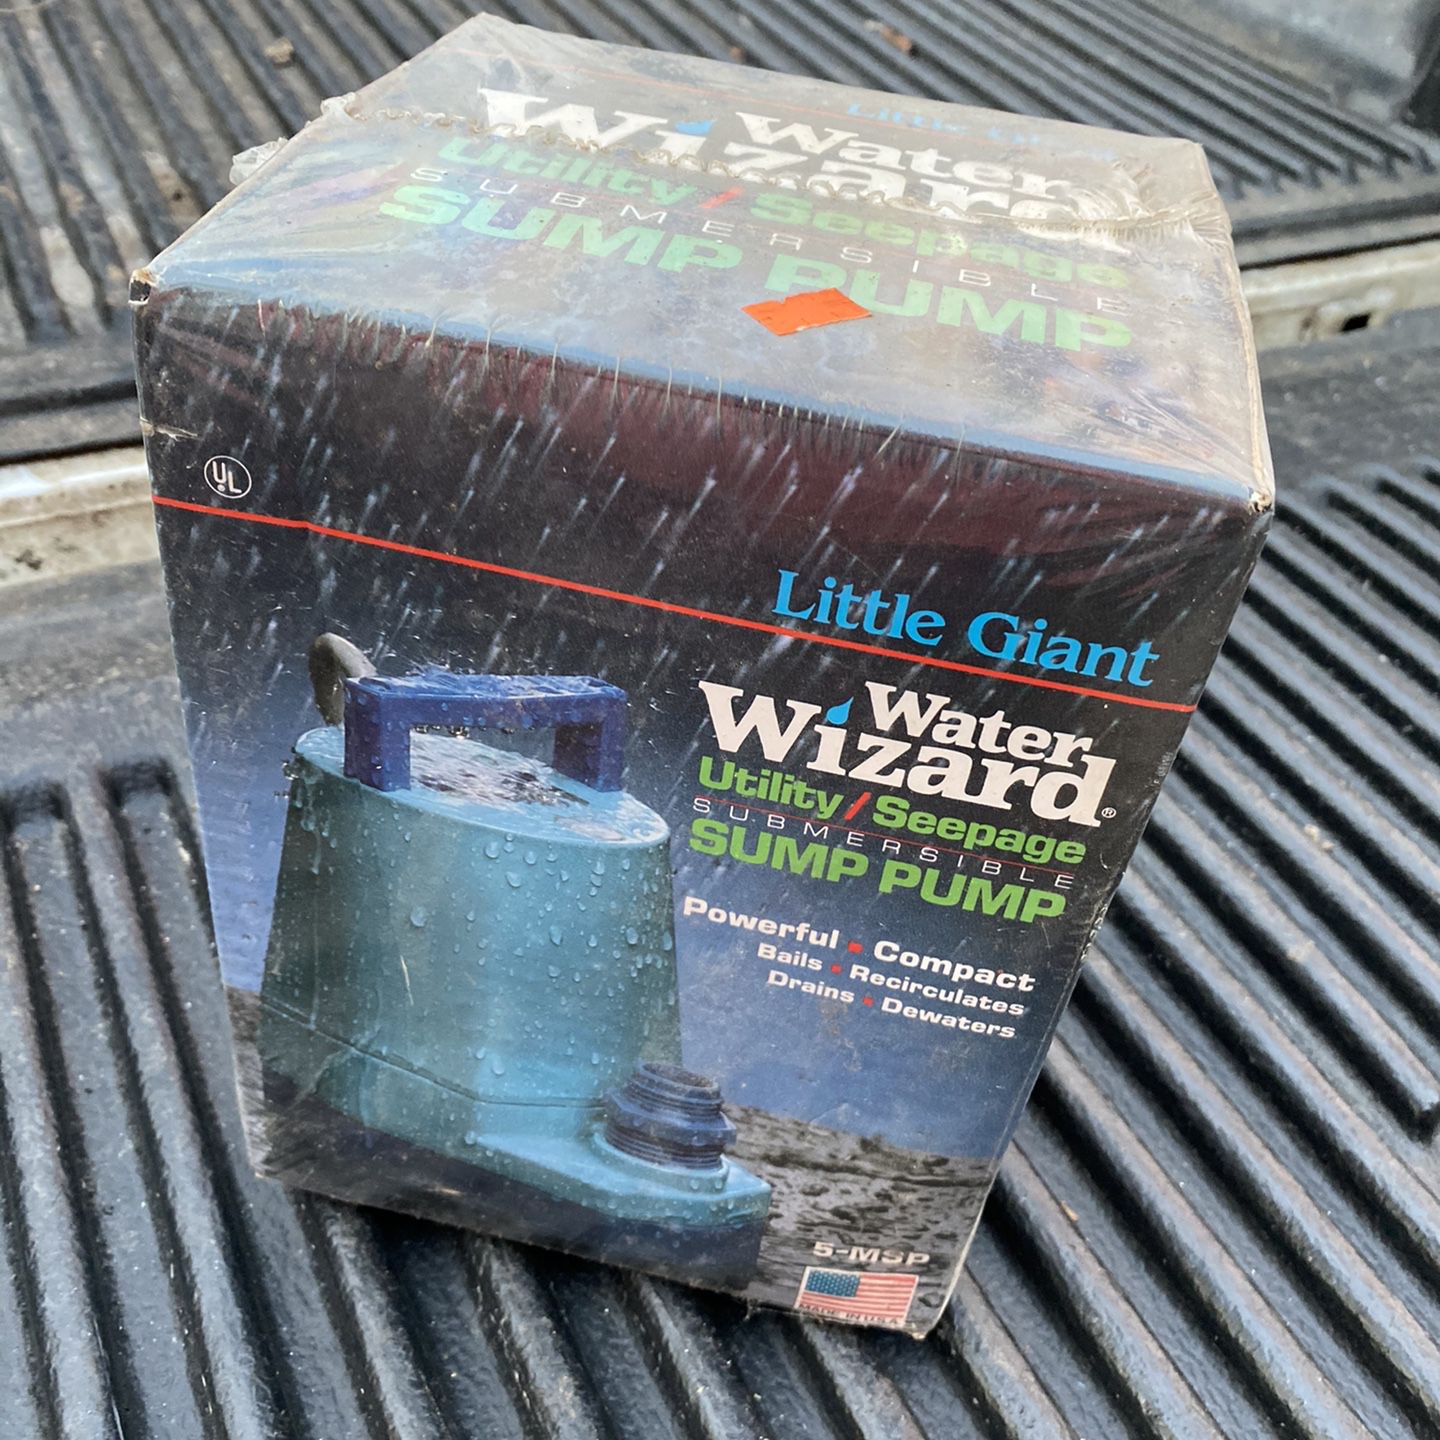 Water Wizard Little Giant Submersible Sump Pump - Brand new in box. Box has damage /dirt on it from storage. I have two available - $75 each. Featur